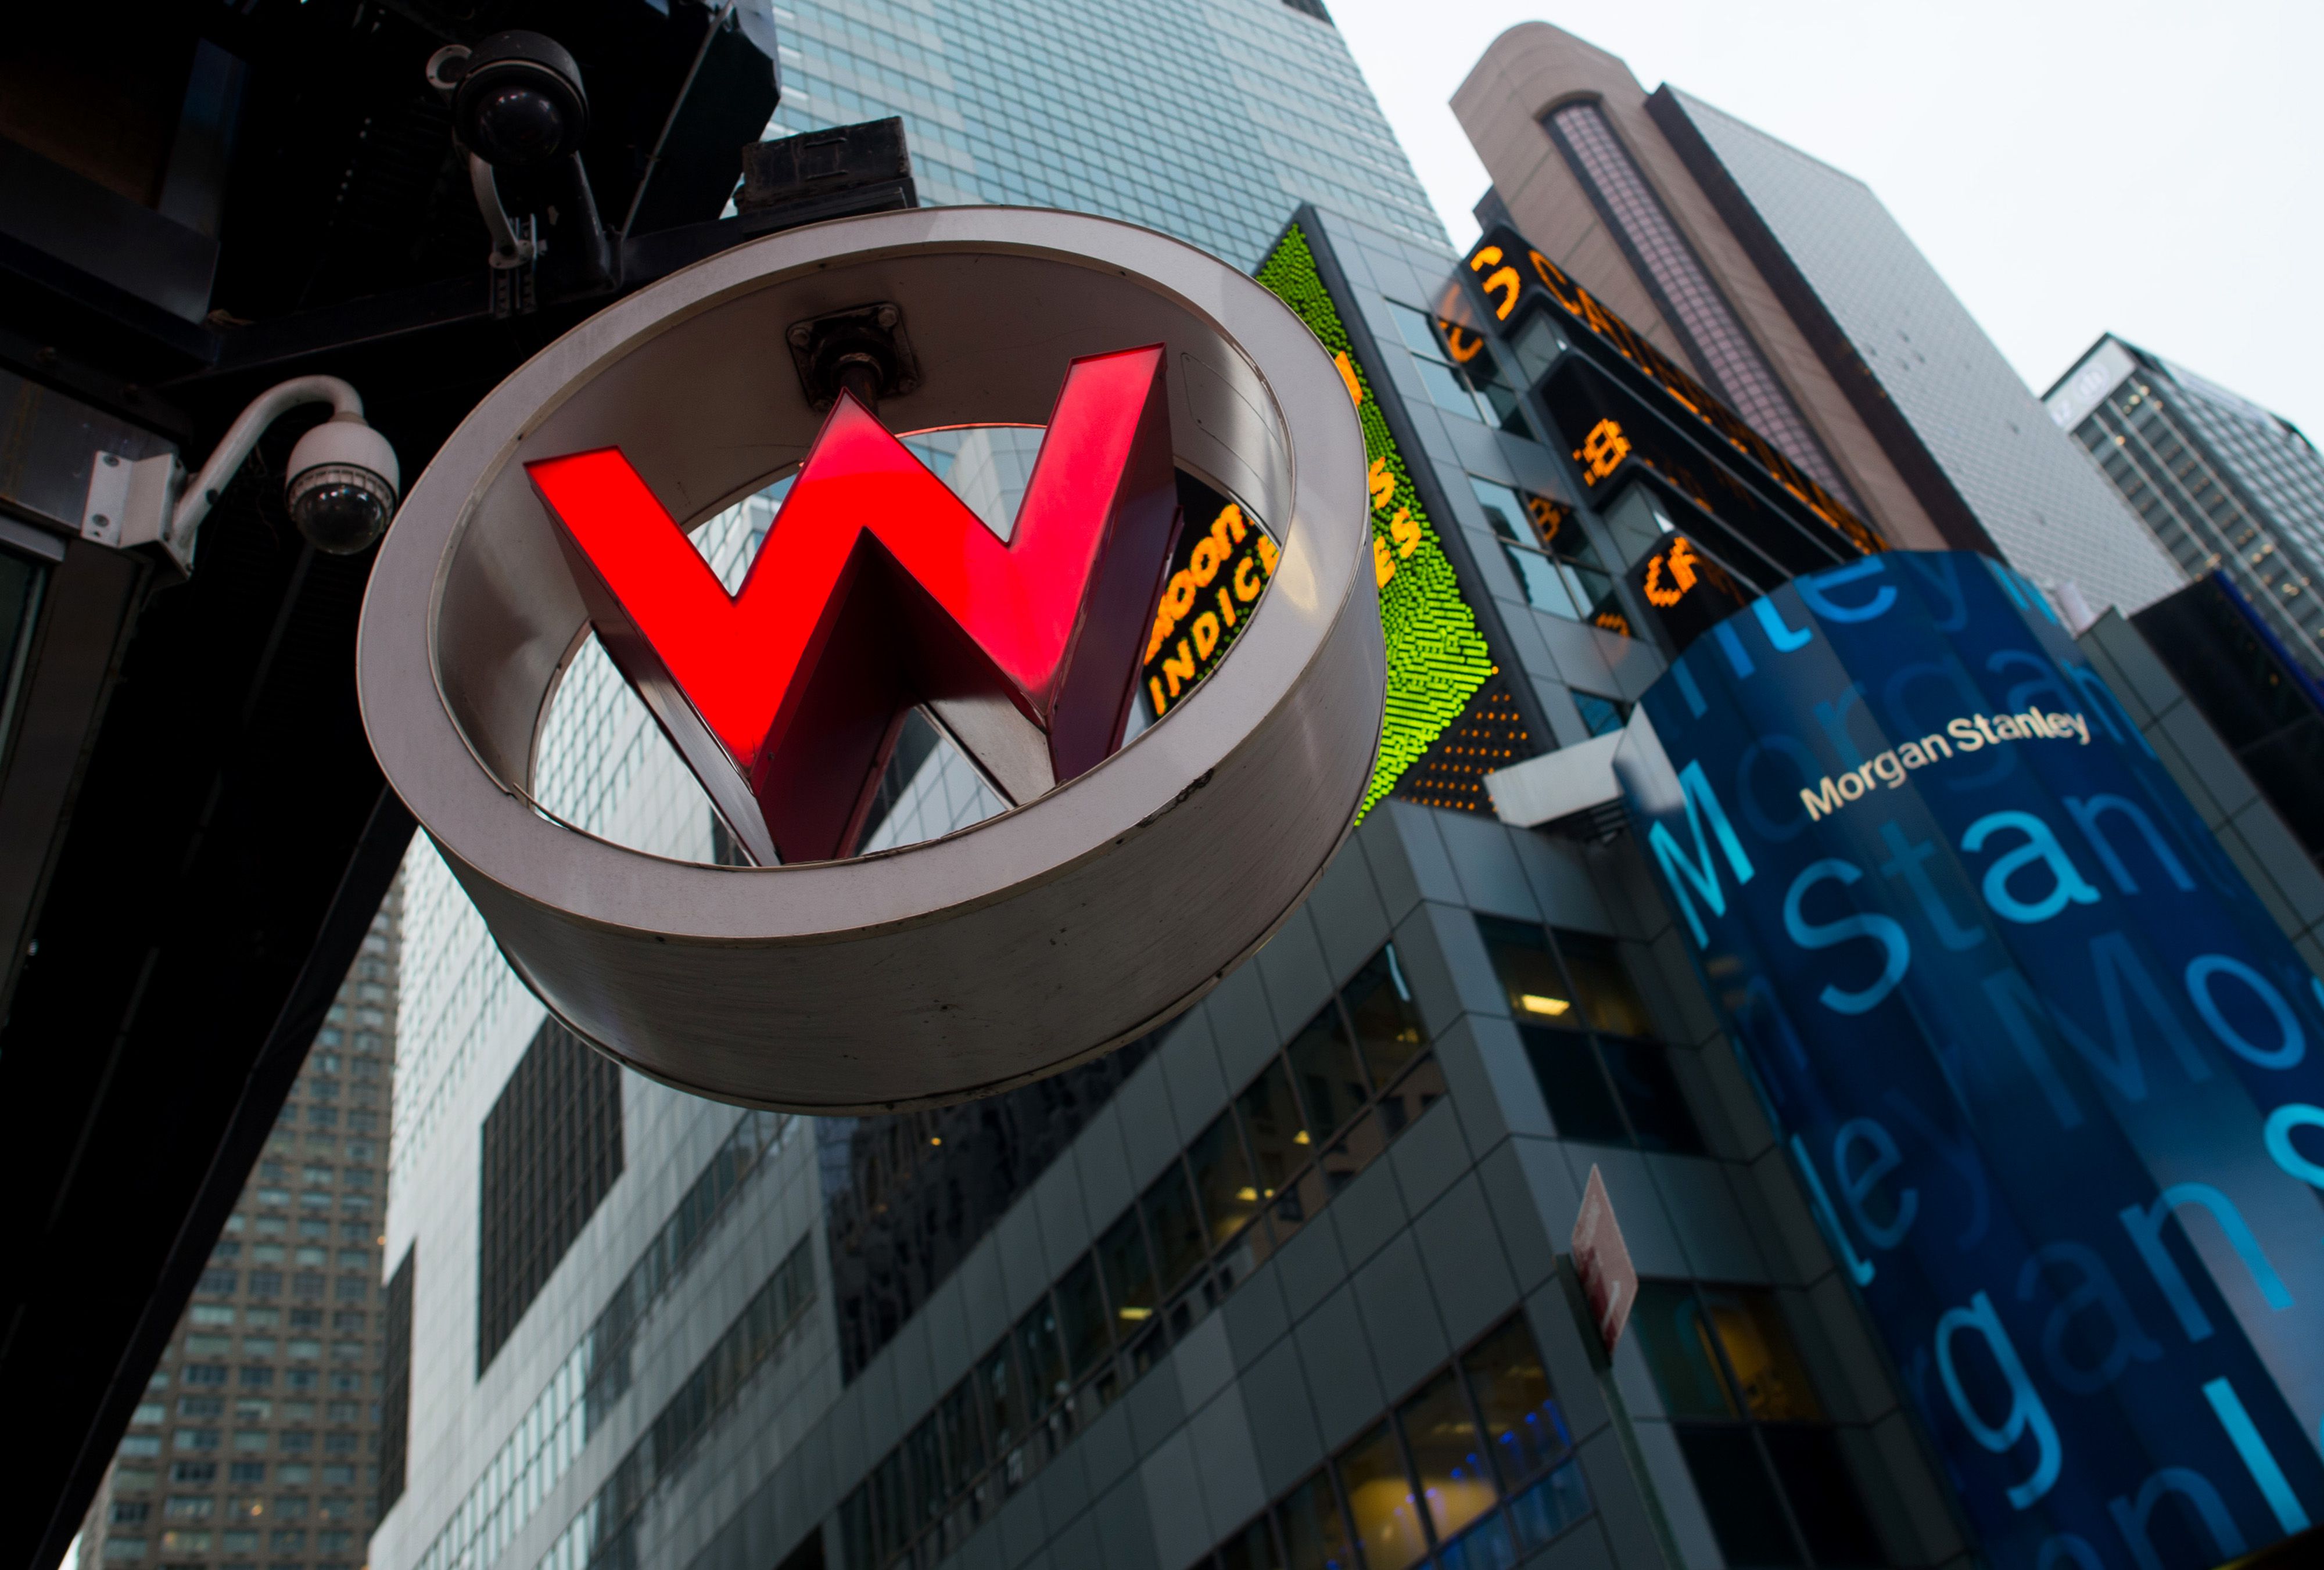 Signage for the W Hotel New York in Times Square. W Hotel is part of Starwood Hotels. (Bloomberg&mdash;Bloomberg via Getty Images)